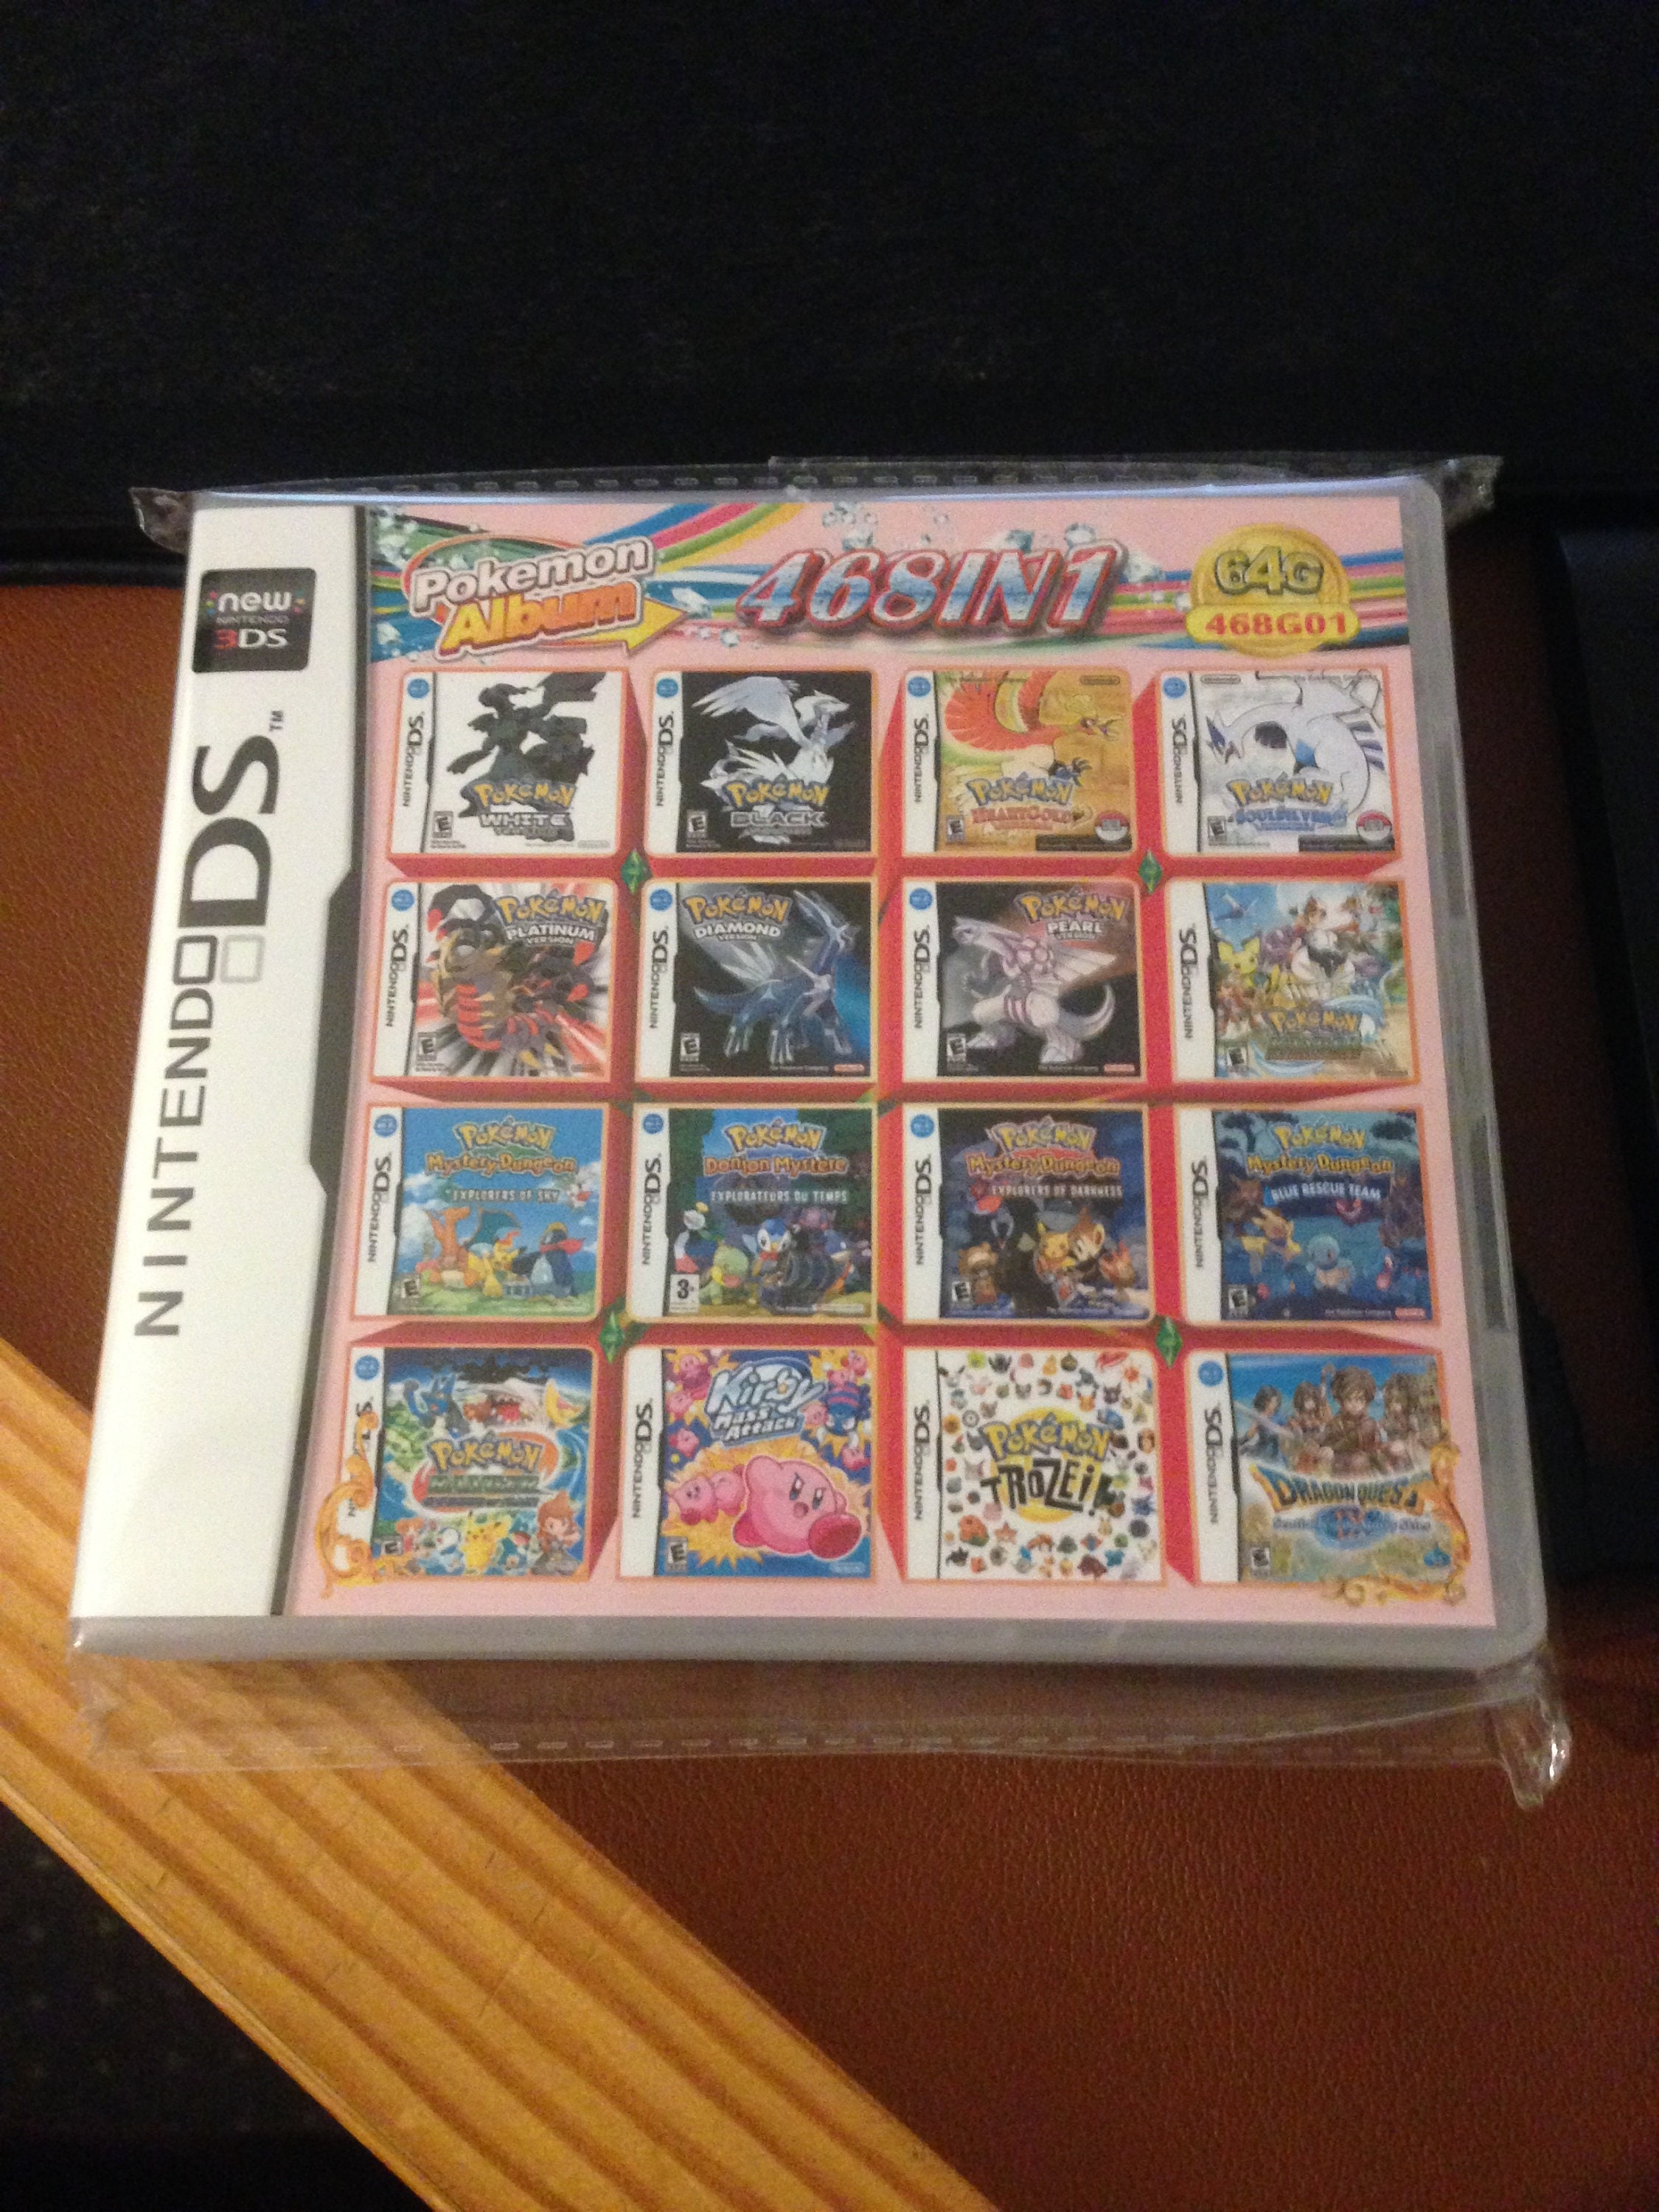  Rhythm Tengoku Gold- DS Game- New Japan Import : Video Games